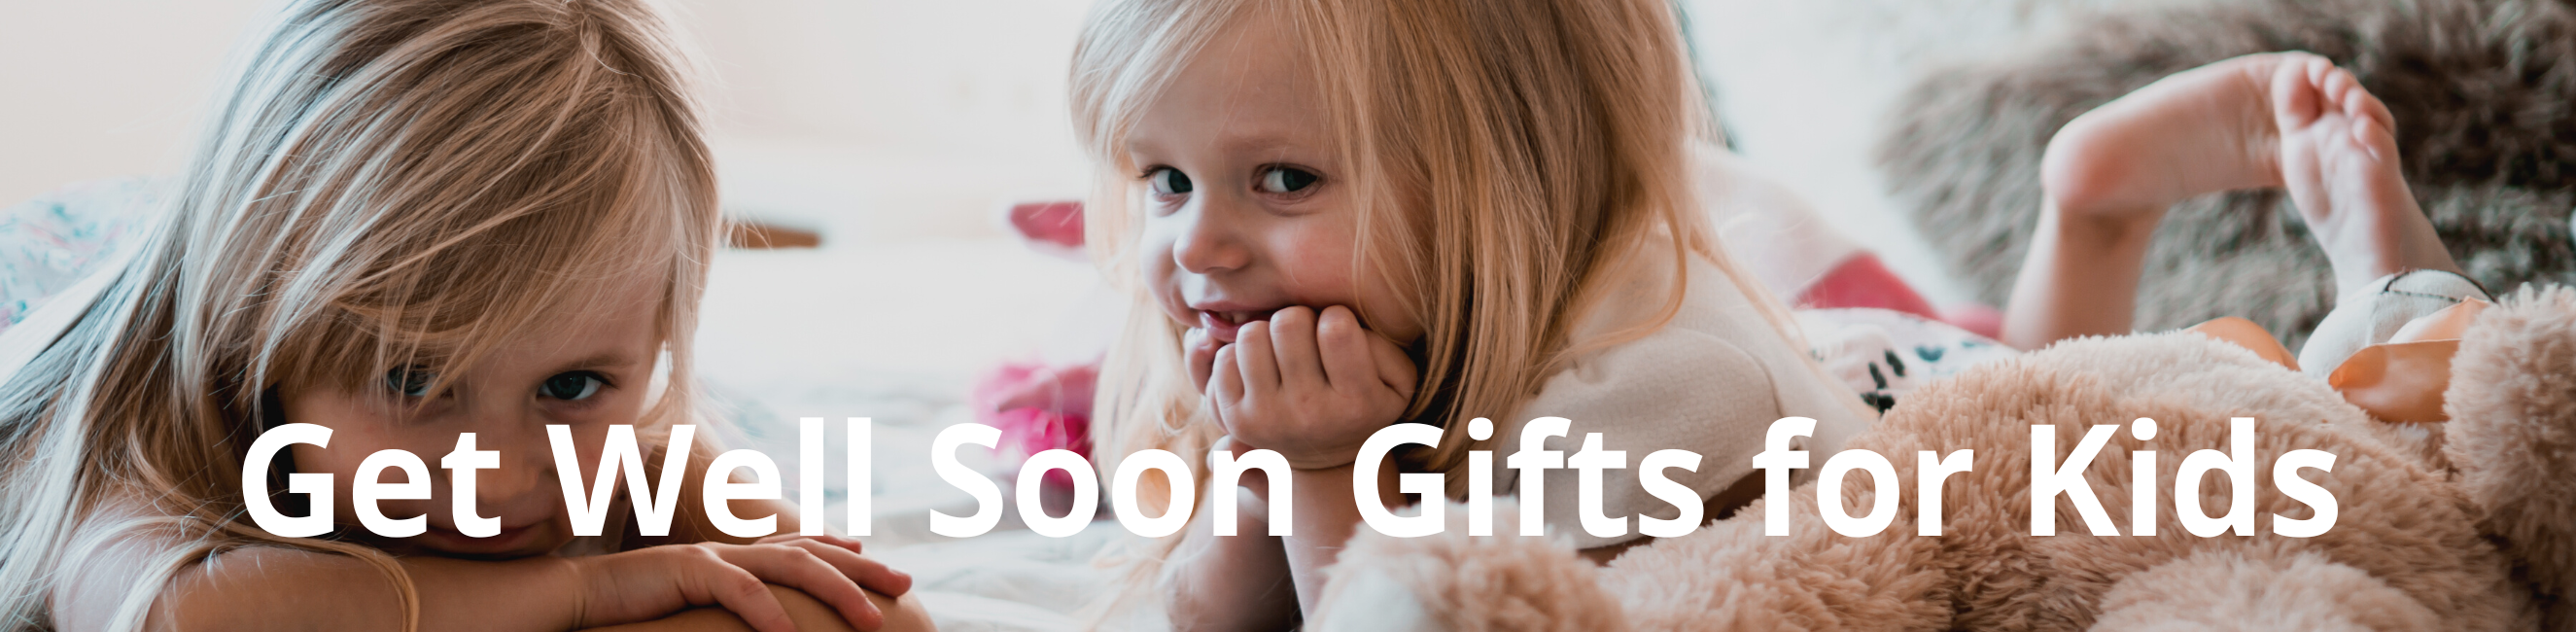 Get Well Soon Gifts for Kids